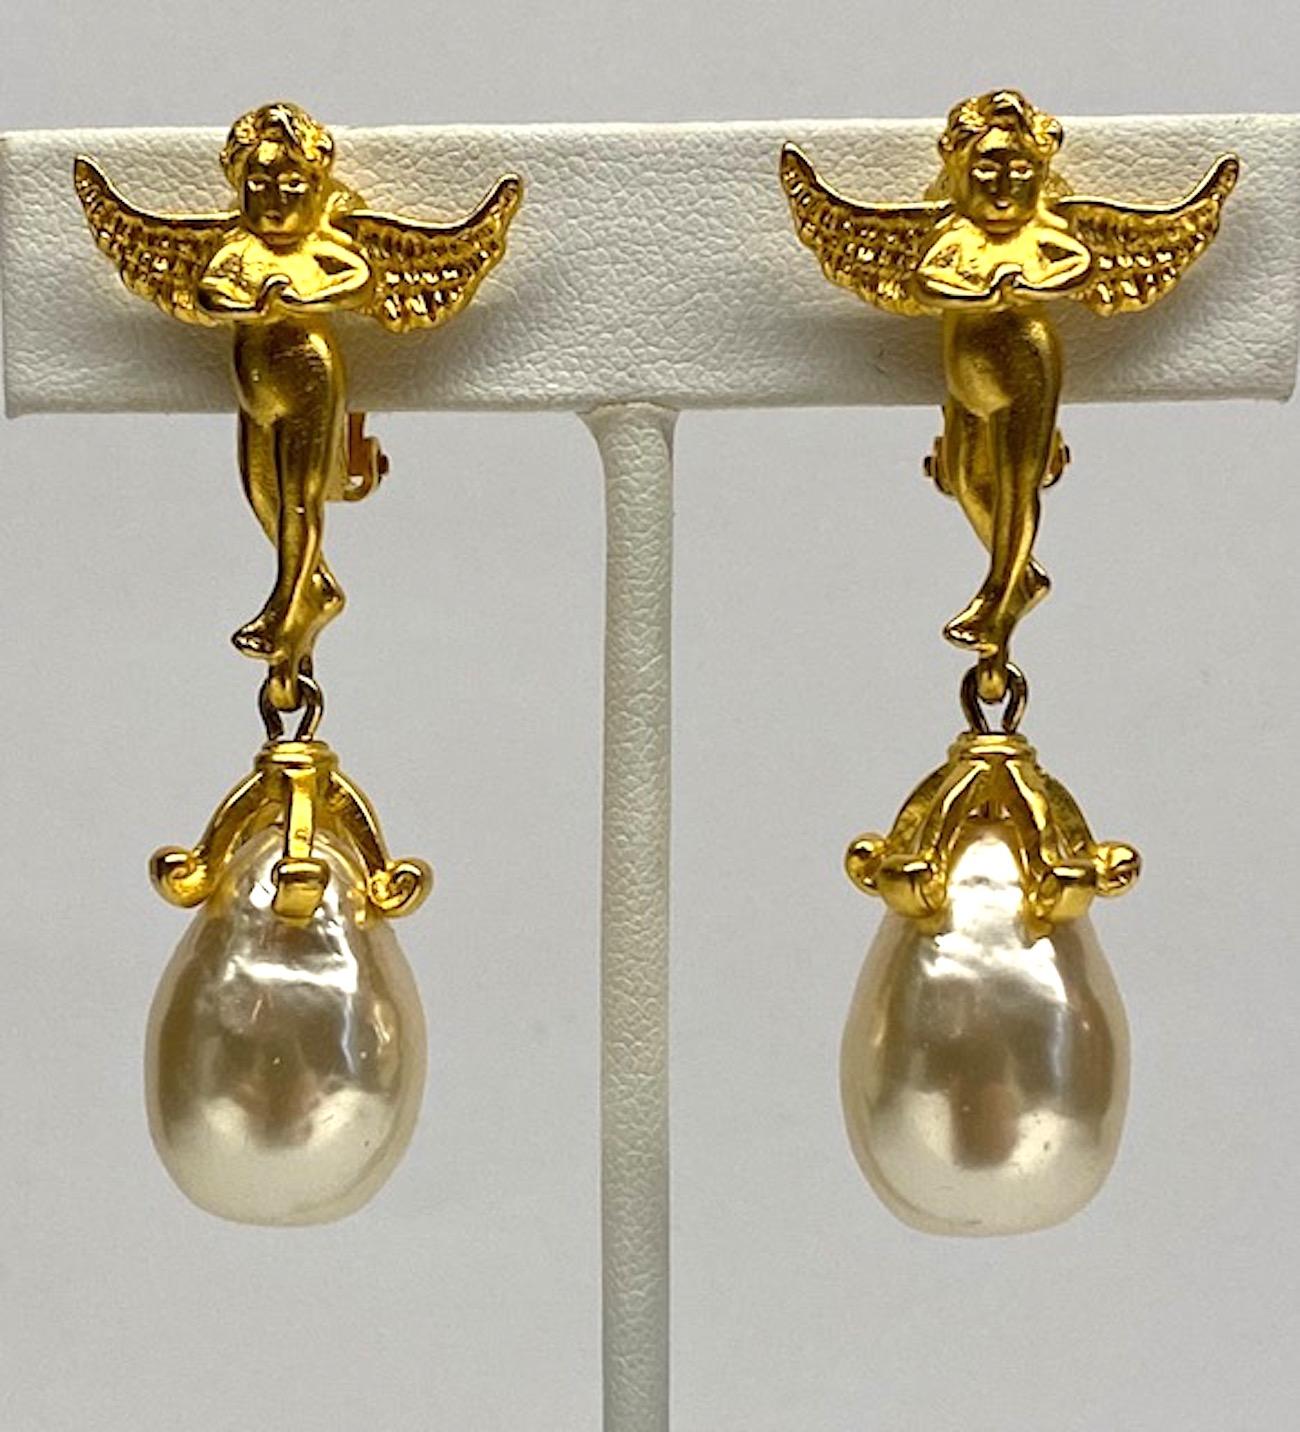 A beautifully cast pair of Karl Lagerfeld 1980s winged cherub earrings in satin gold with pear shape pearl pendants. The cherubs are three dimensional with clip back. The pear shape faux Baroque pearls are mounted into a five prong top setting. Each